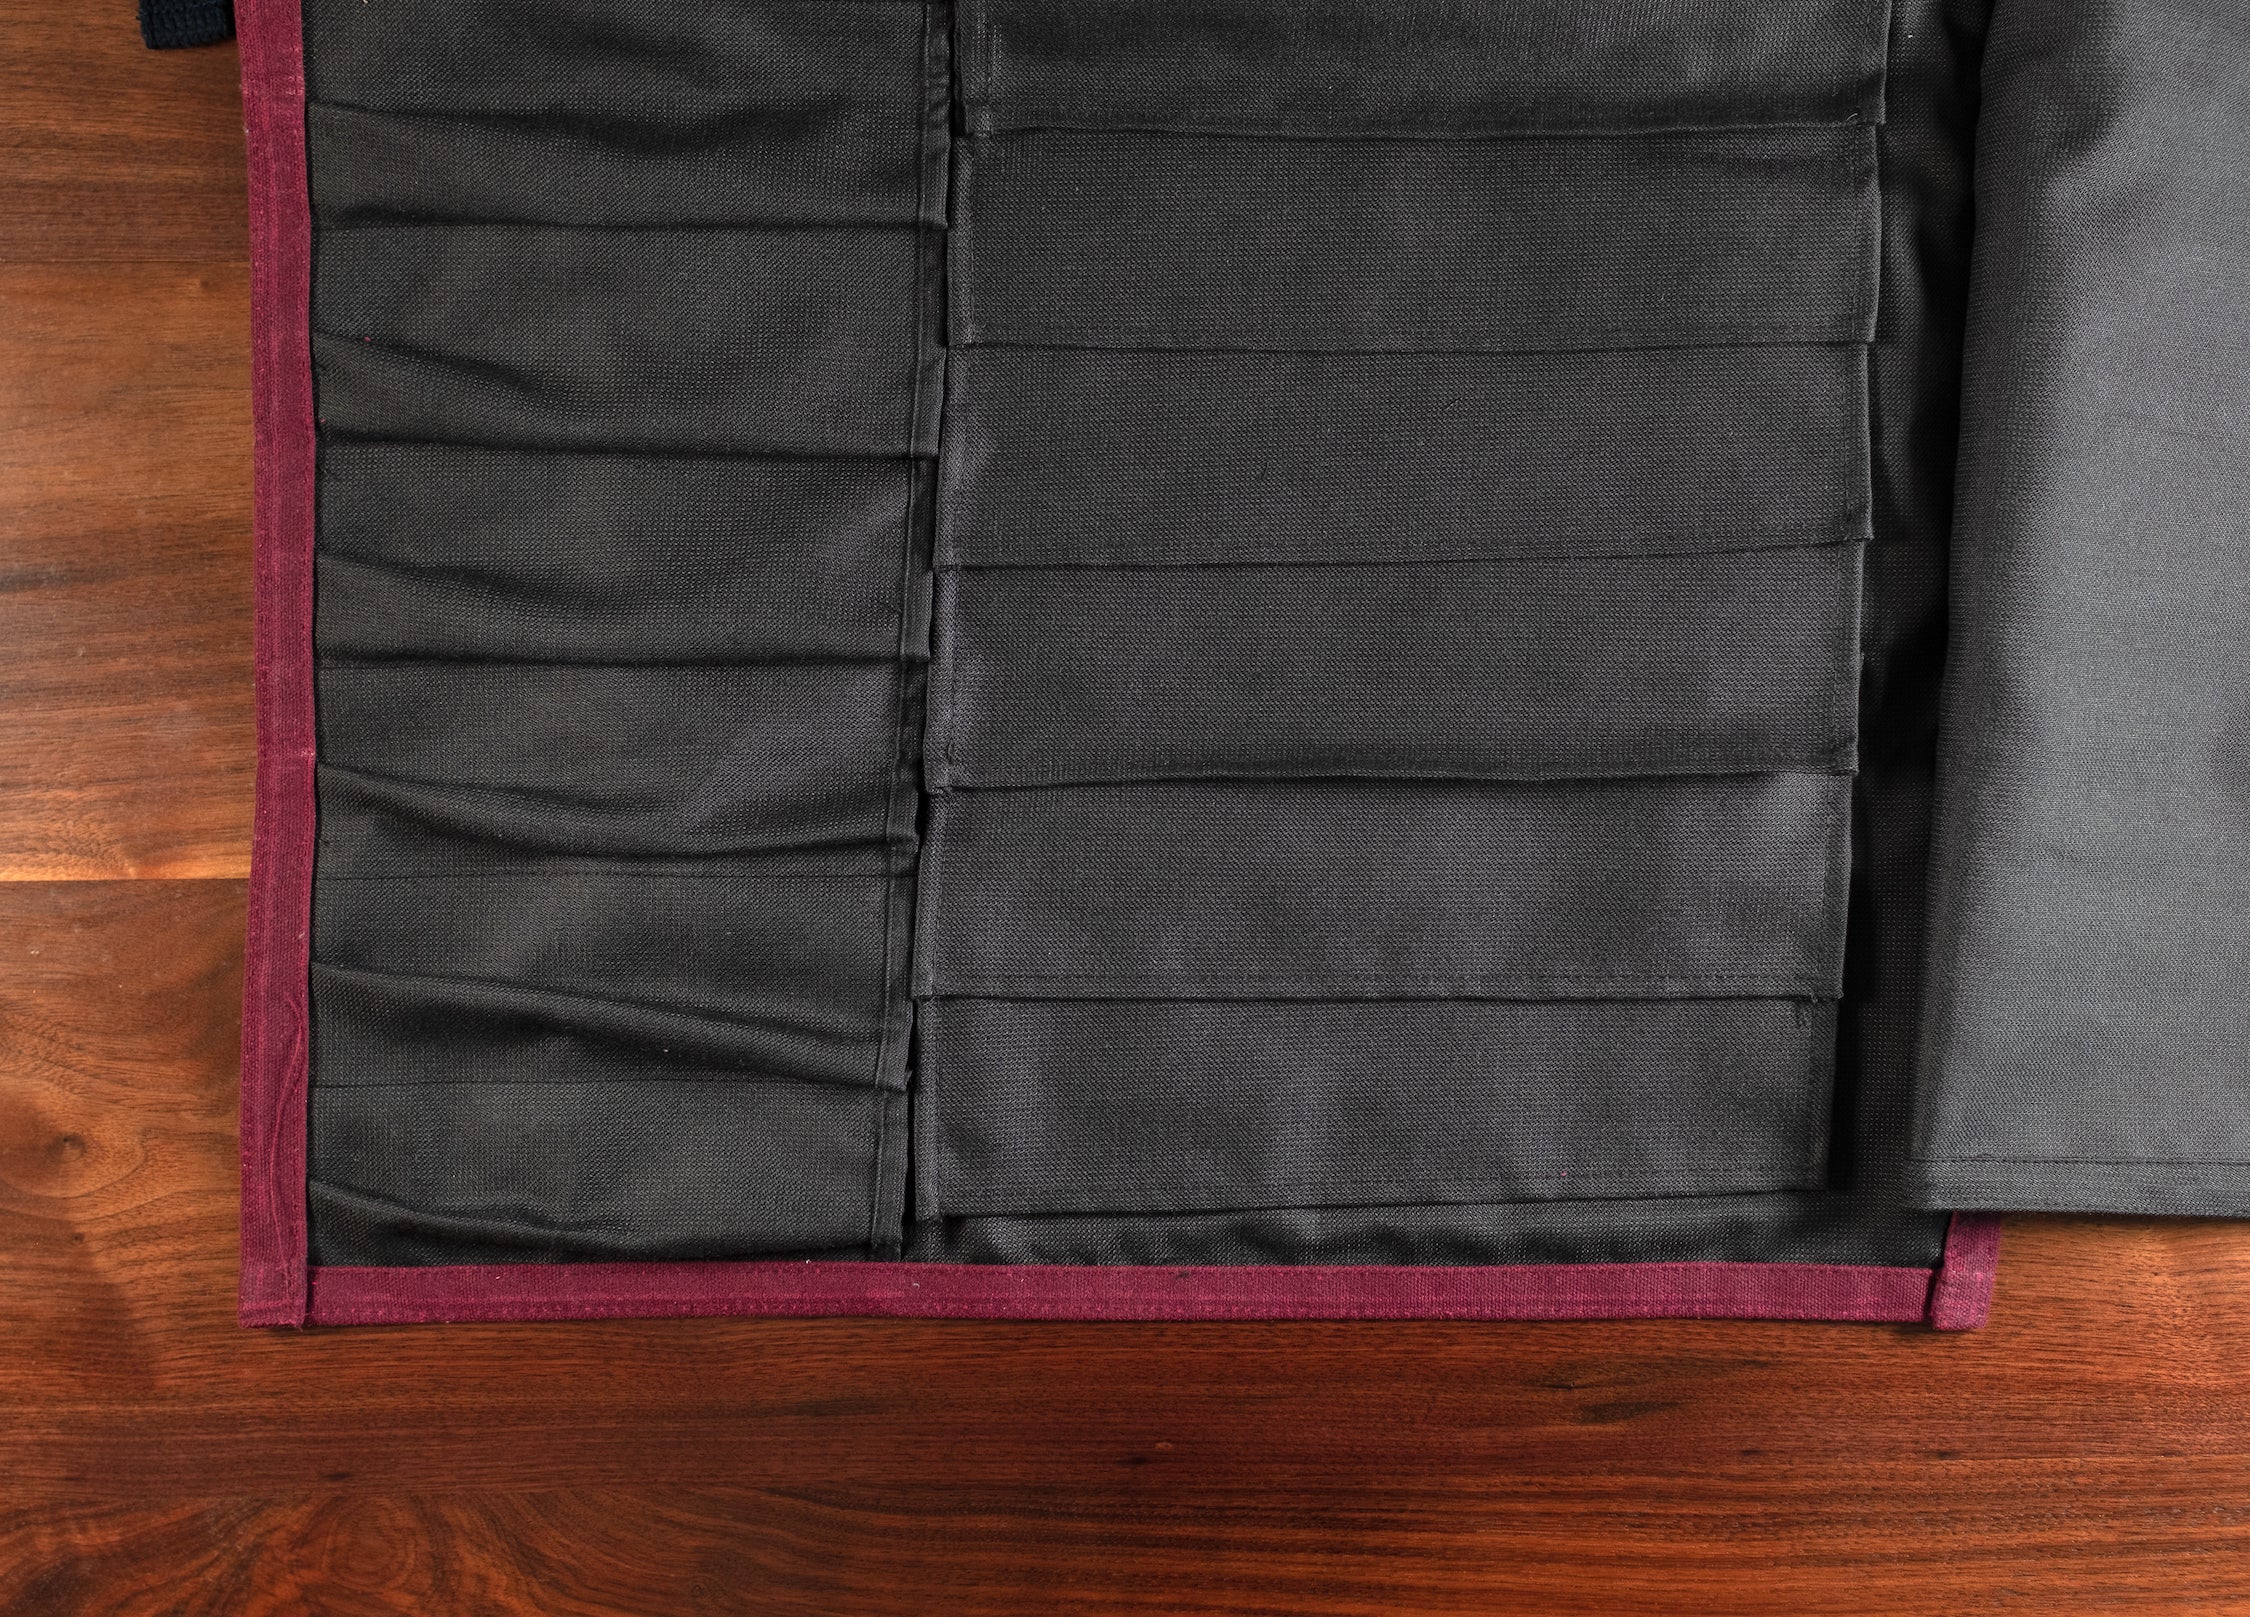    Black interior of the Side Hustle burgundy knife roll laid out flat on a wooden surface. The interior is made of a 50-50 Kevlar/Nomex blend for long lasting protection. Design by Craftmade Aprons in Minnesota.